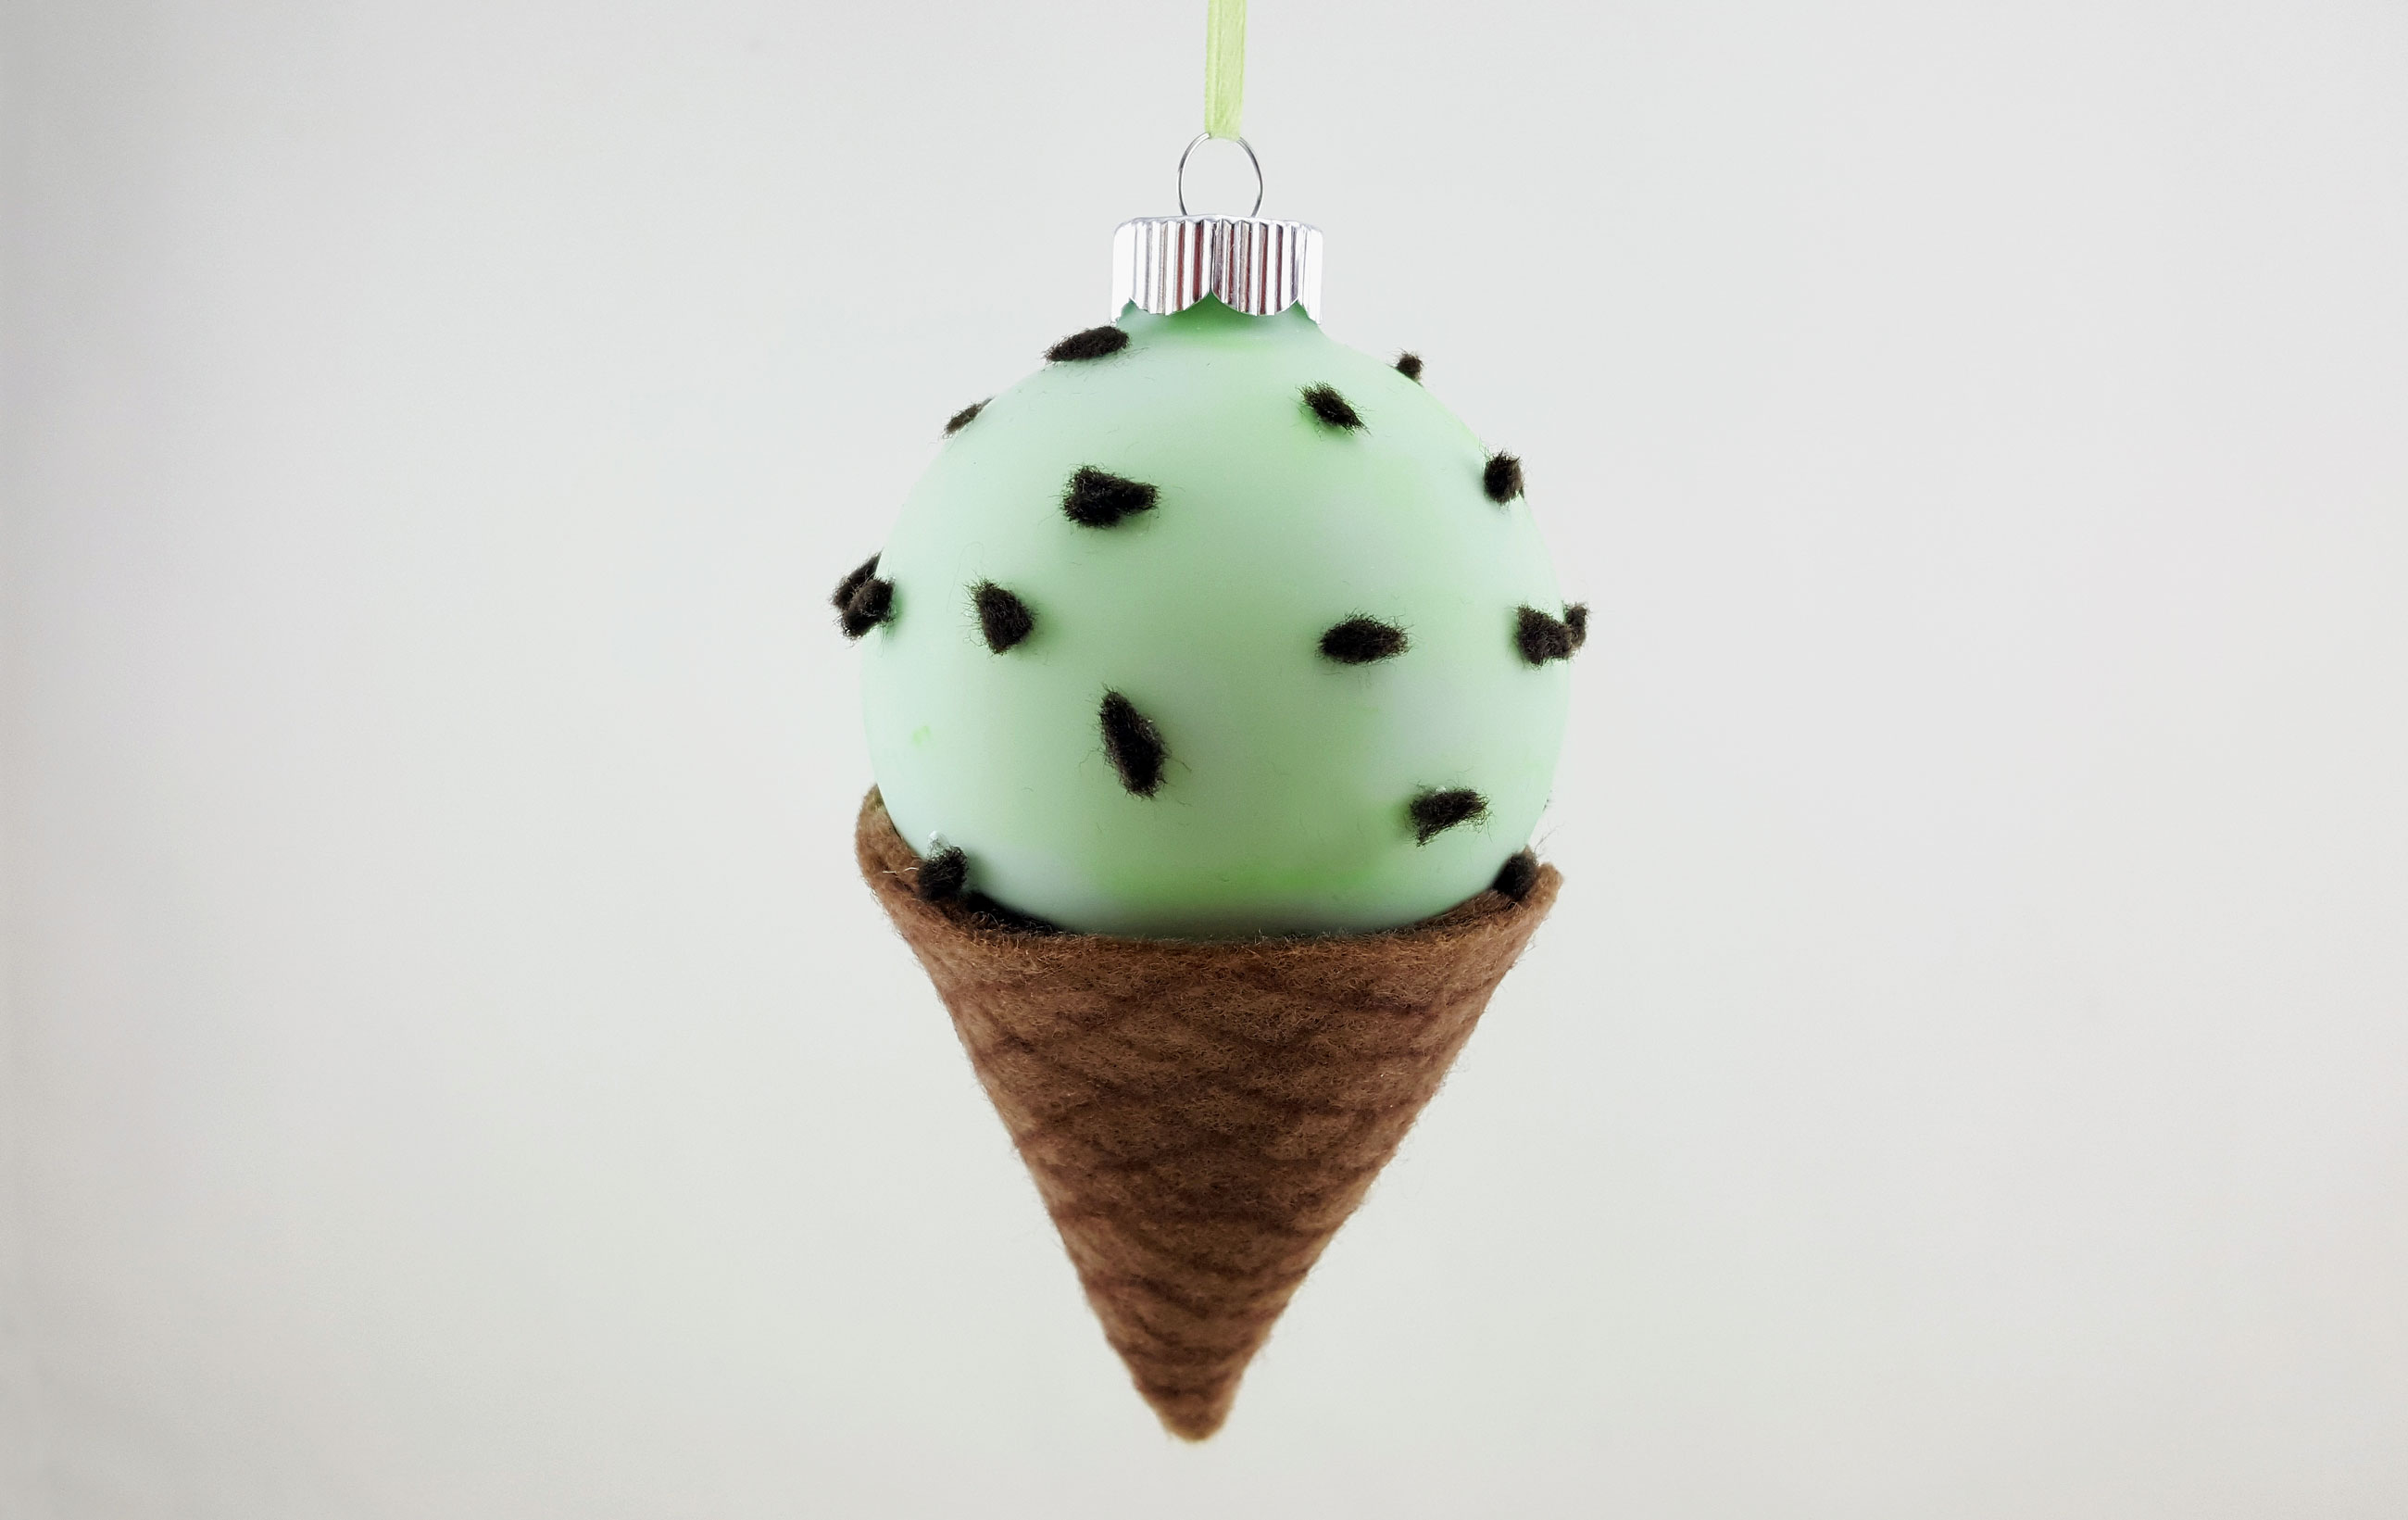 A Chocolate Mint Ice Cream Cone ornament decoration hangs from its own ornament stand for display by your desserts. | OrnamentShop.com